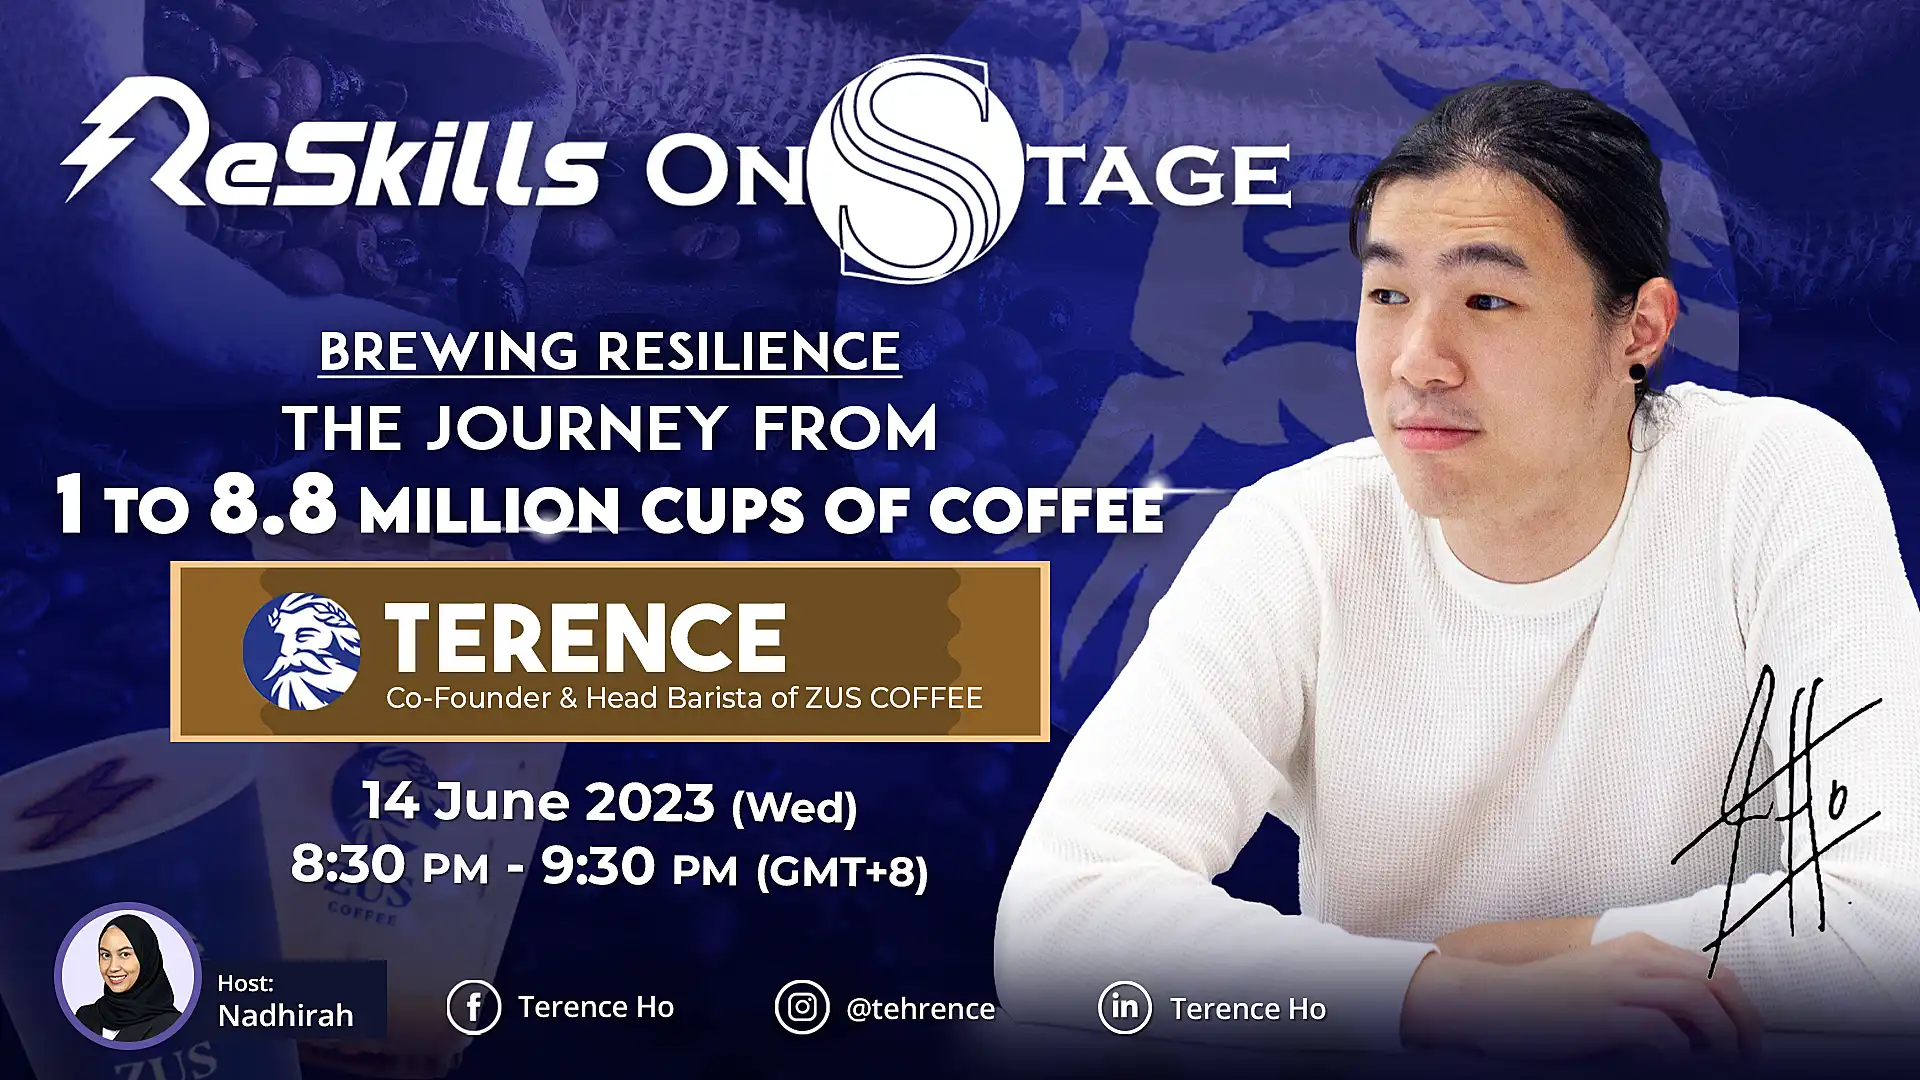 Brewing Resilience: The Journey from 1 to 8.8 Million Cups of Coffee - ReSkills